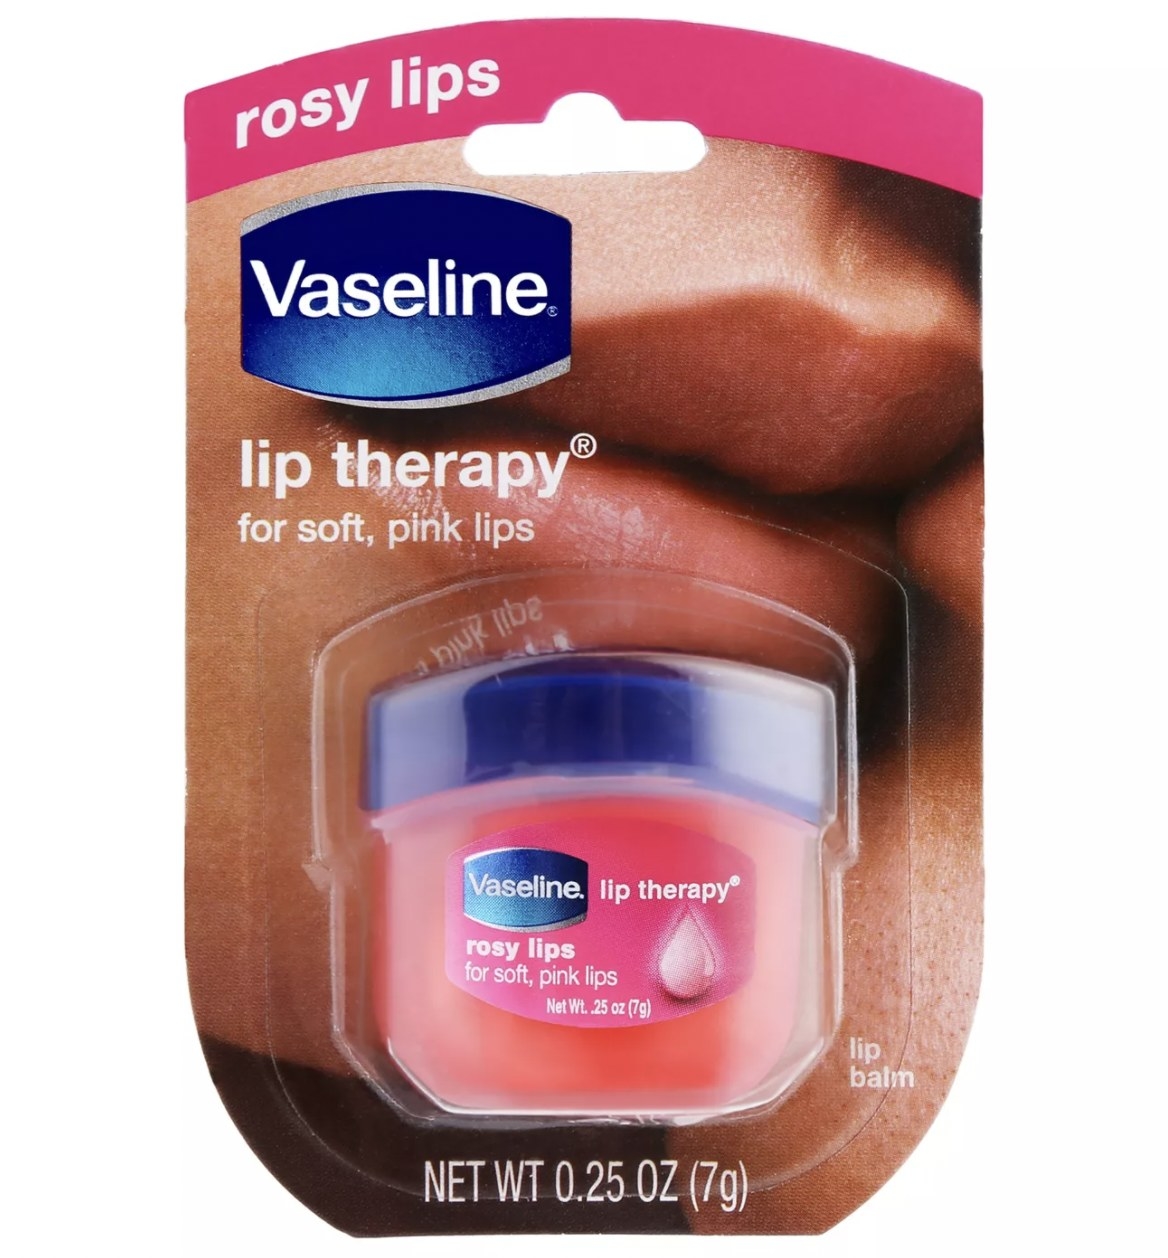 Product shot of Vaseline rosy lip therapy